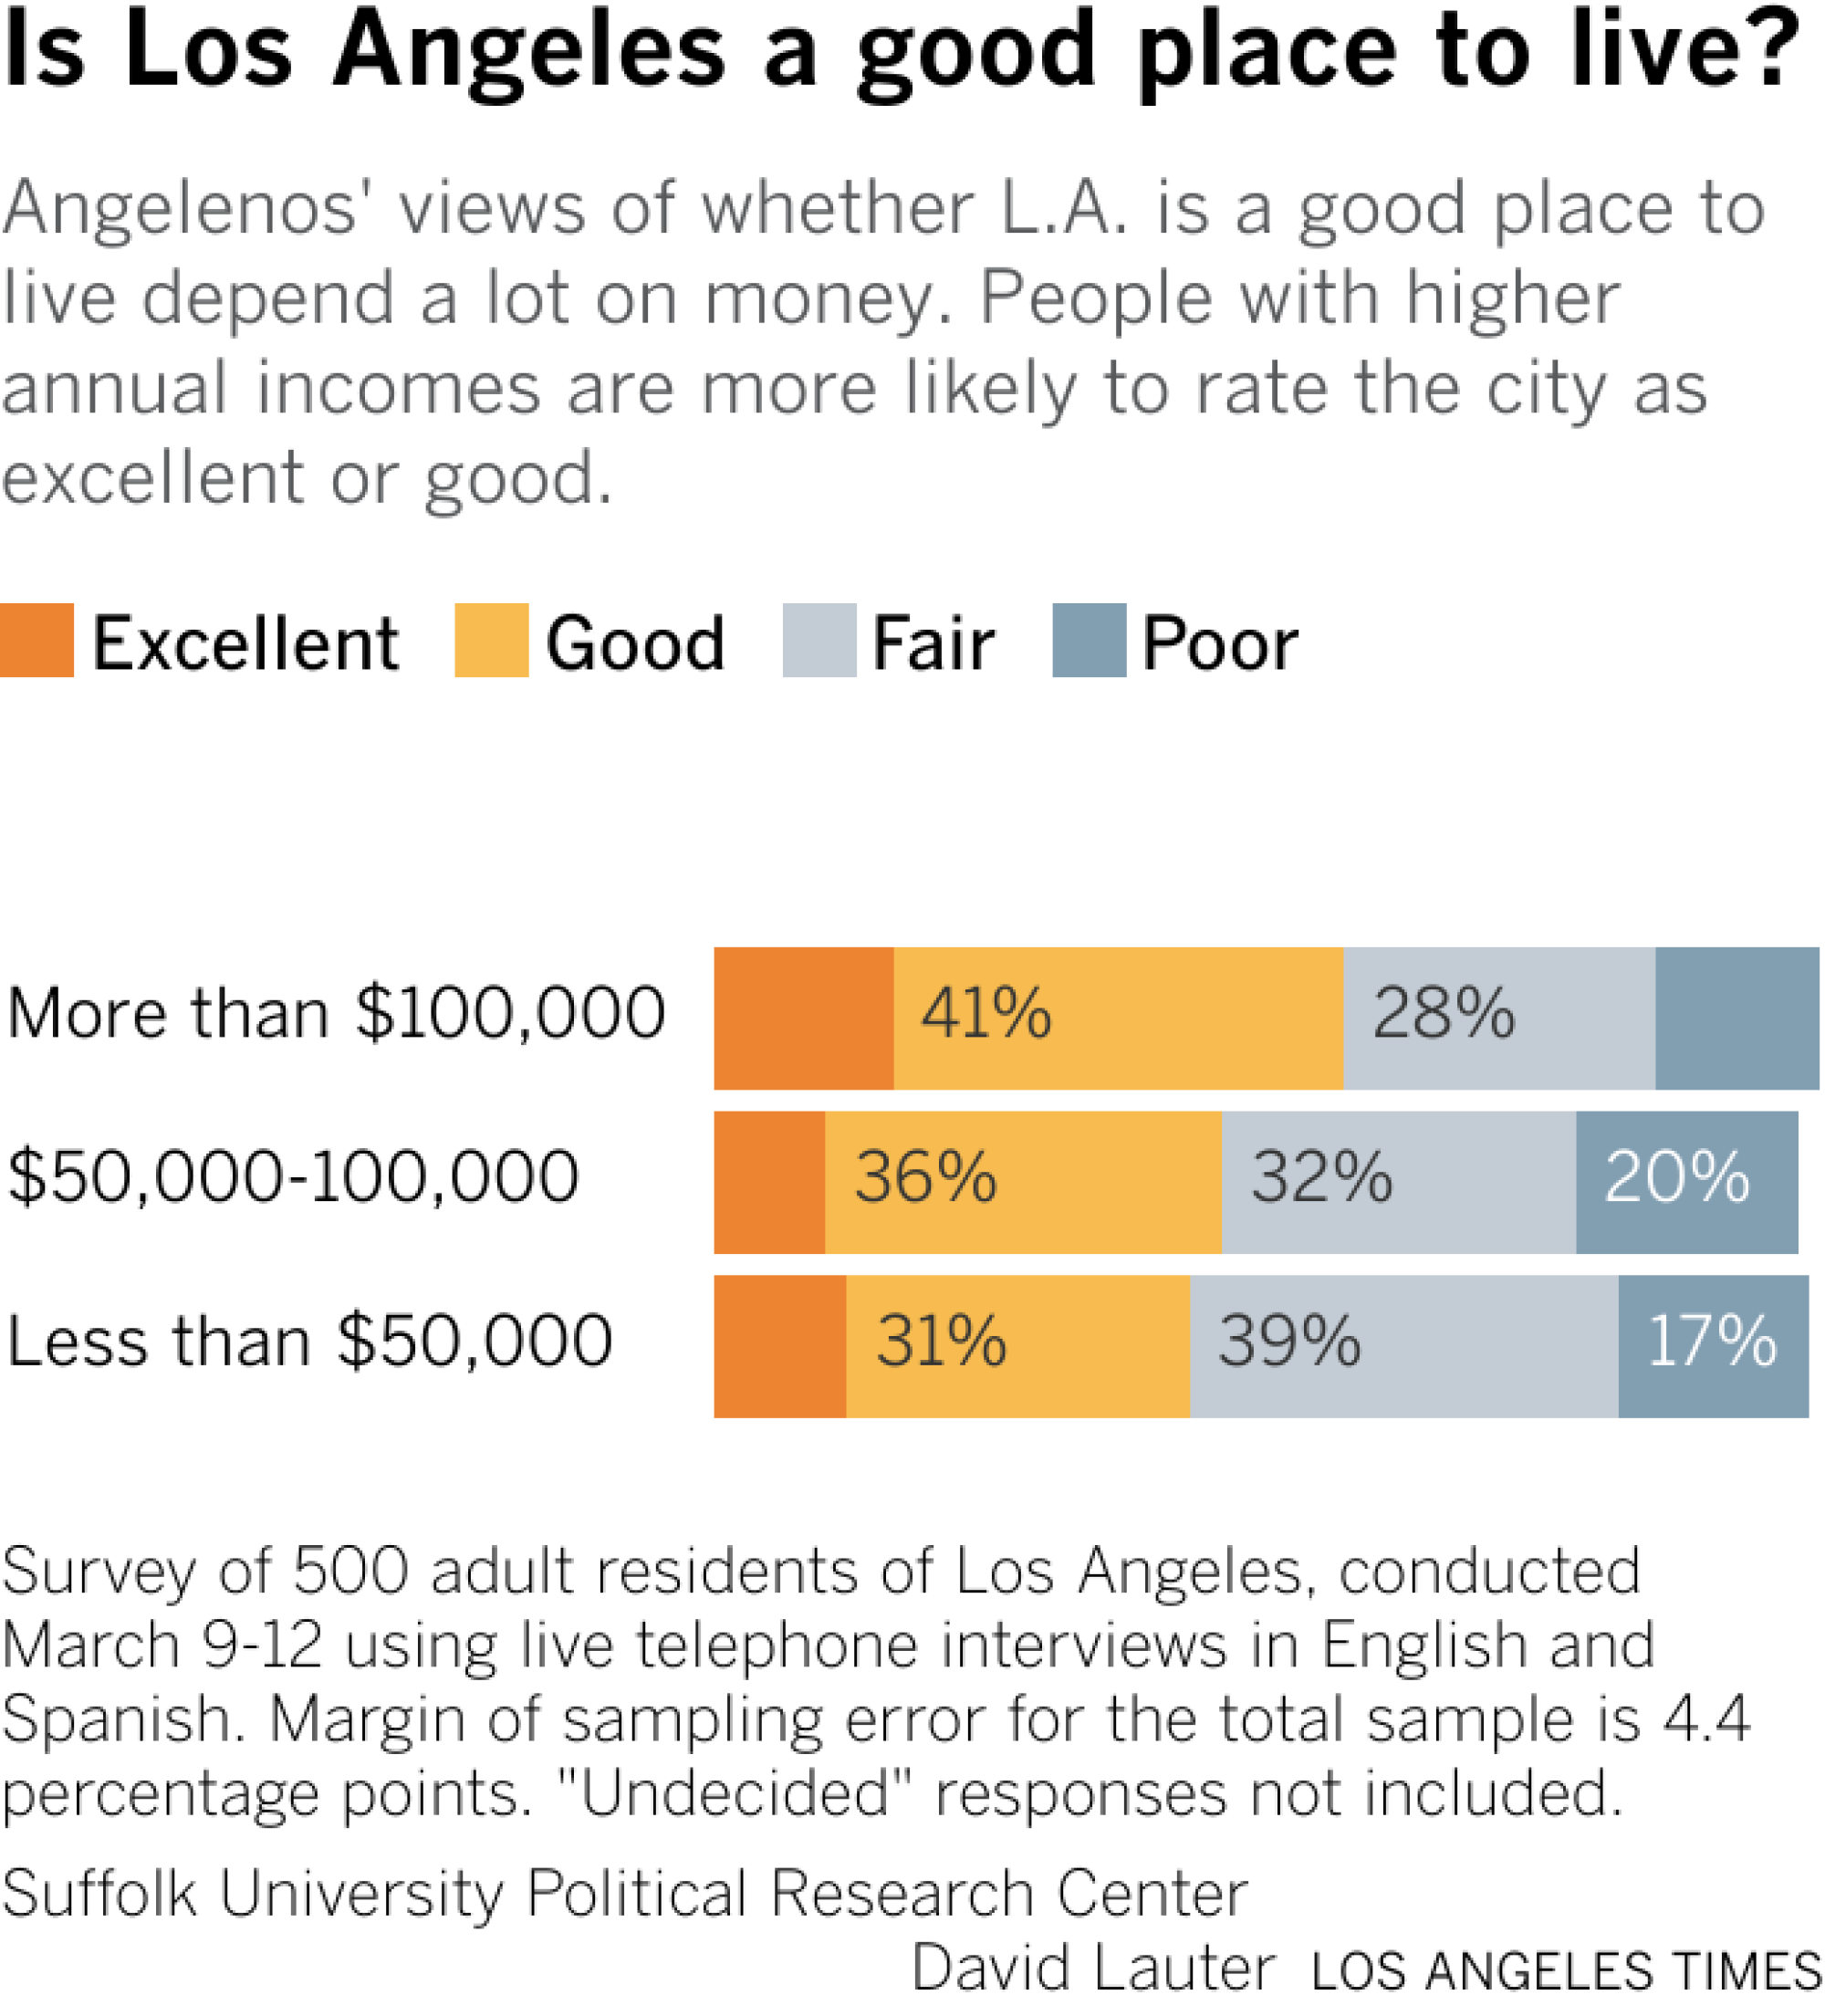 Bars show the share of LA residents who think the city is an excellent, good, fair or poor place to live, divided by annual income -- more than $100,000, $50,000-$100,000, or less than $50,000.